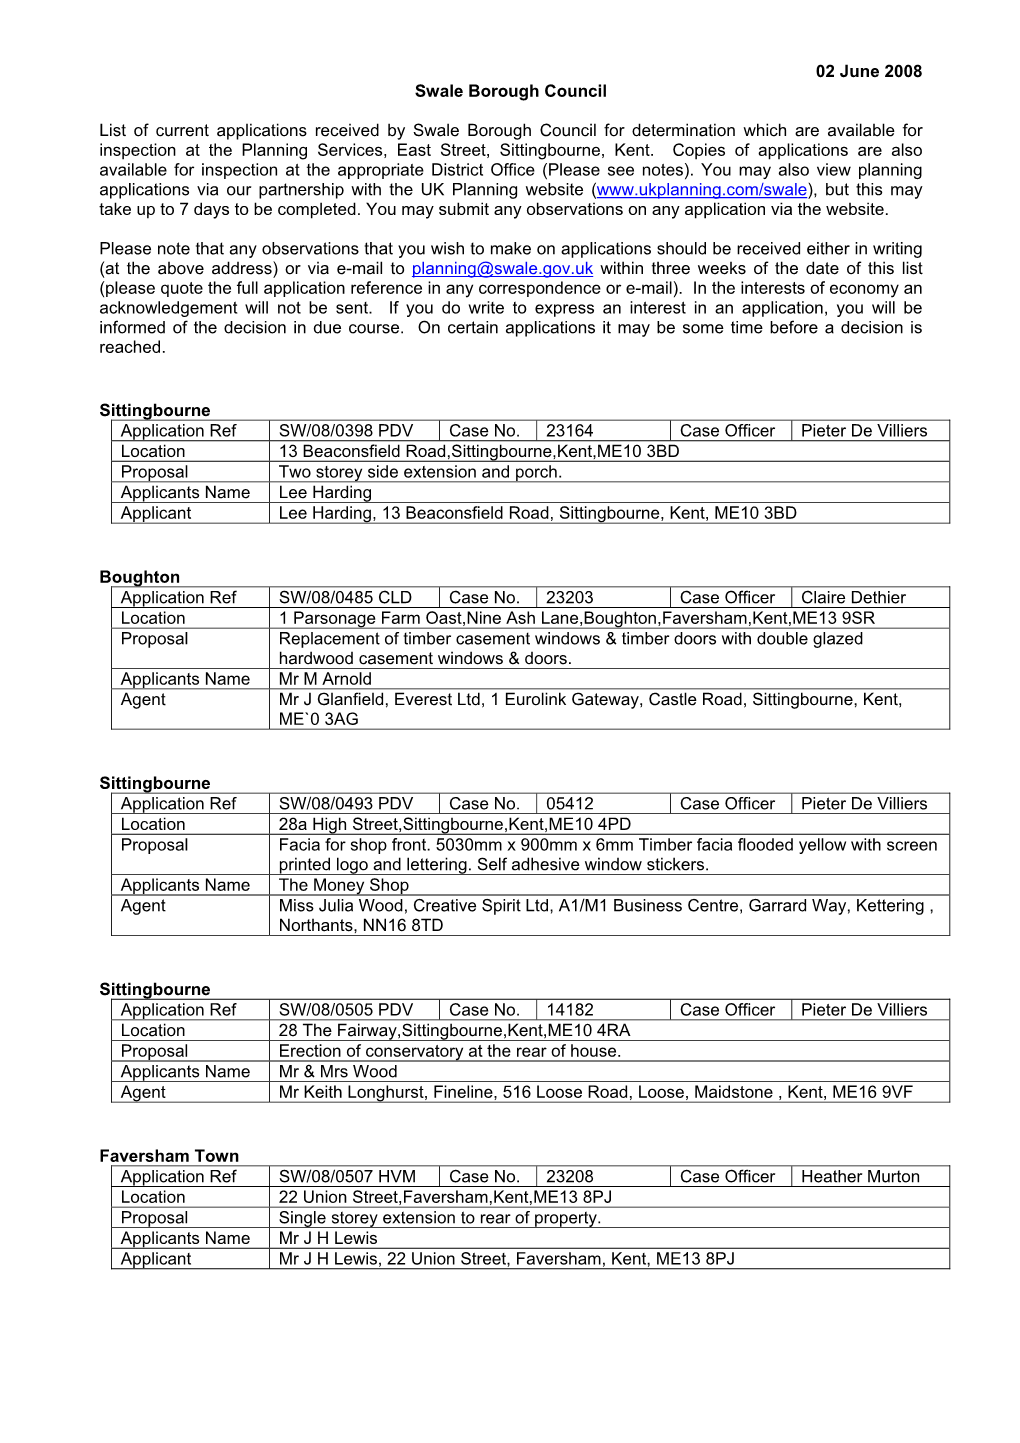 02 June 2008 Swale Borough Council List of Current Applications Received